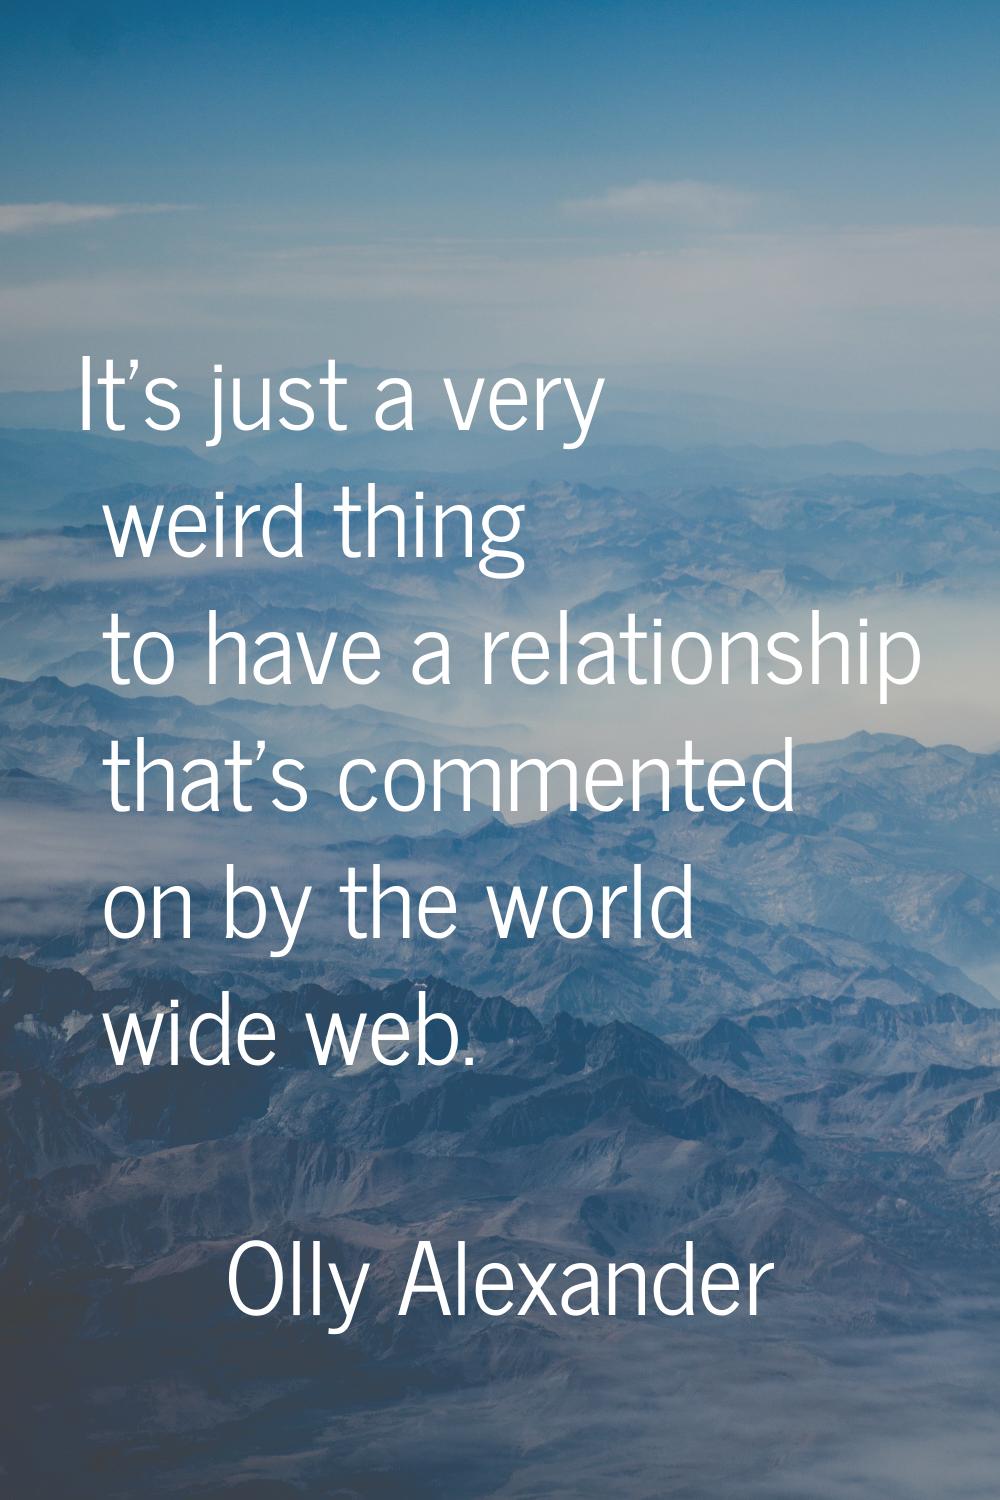 It's just a very weird thing to have a relationship that's commented on by the world wide web.